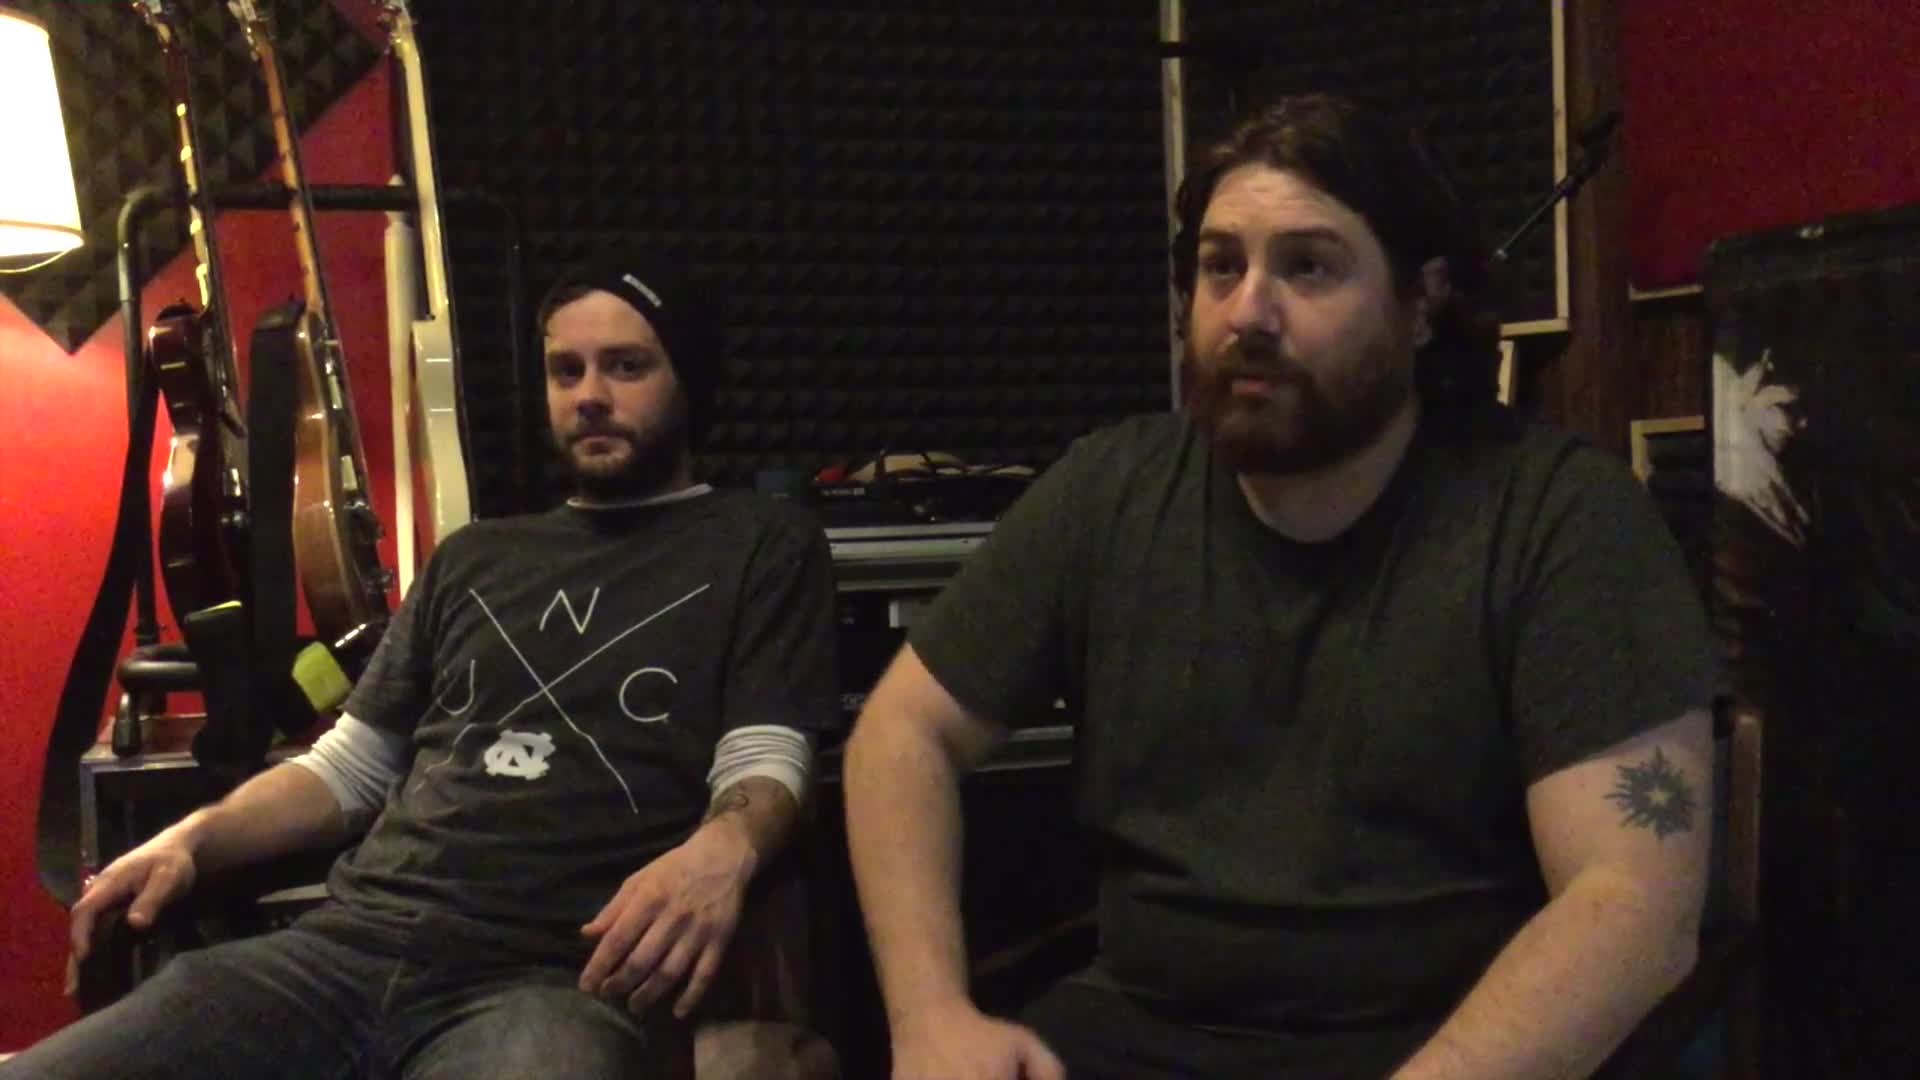 Meet the co-owners of The Attic Recording Studios